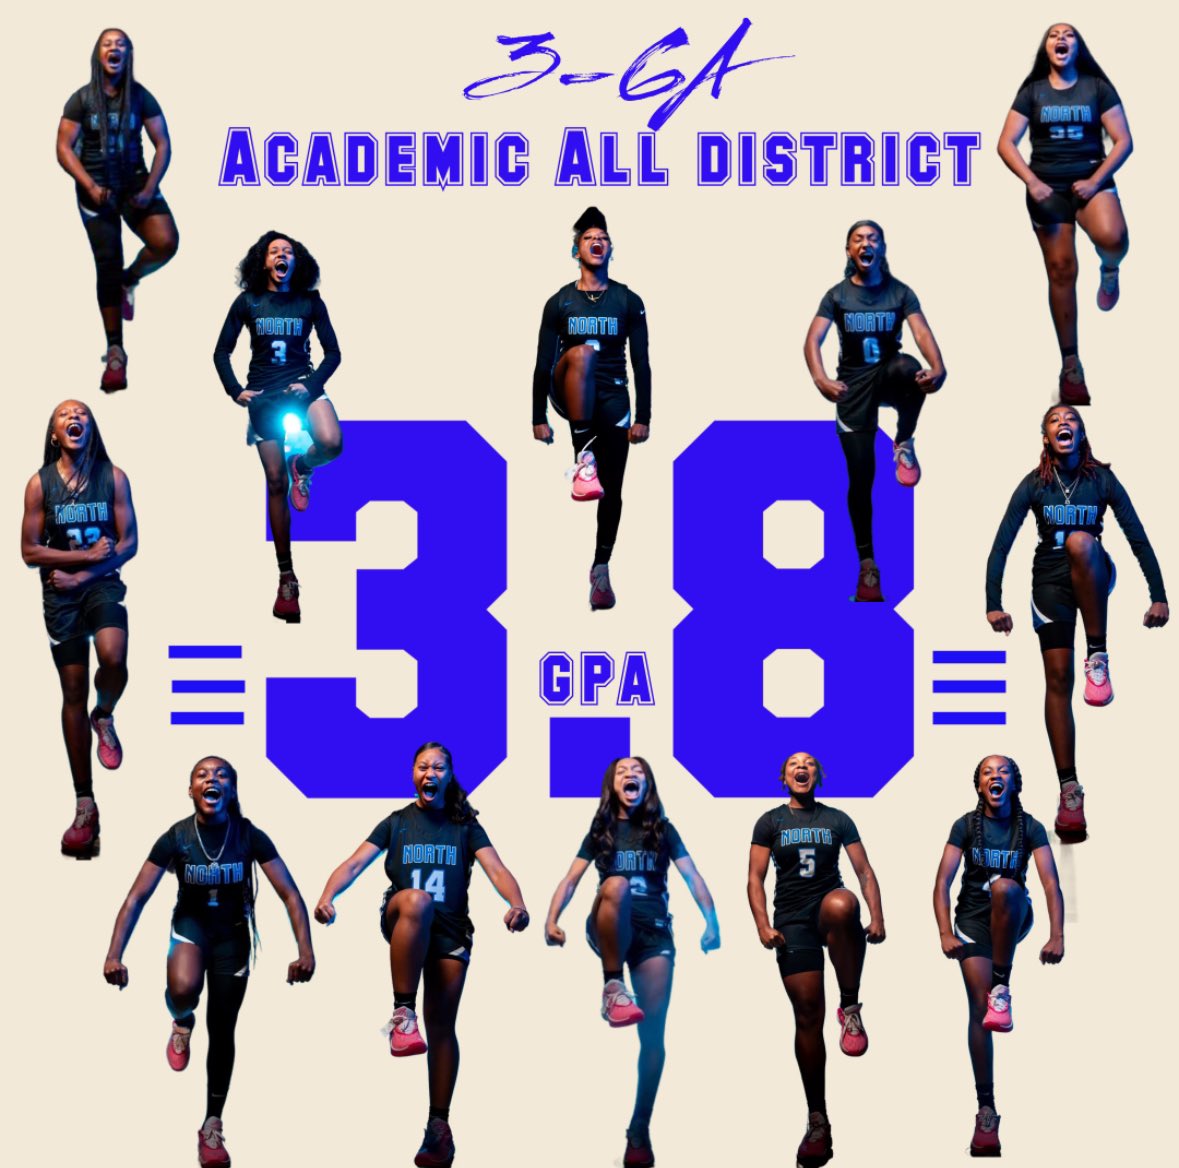 Join us in congratulating these young ladies for their dedication to their academic success. Team GPA of 3.8, let’s go!!!!!!! @DMNGregRiddle @uiltexas @Gosset41 @CrowleyISD